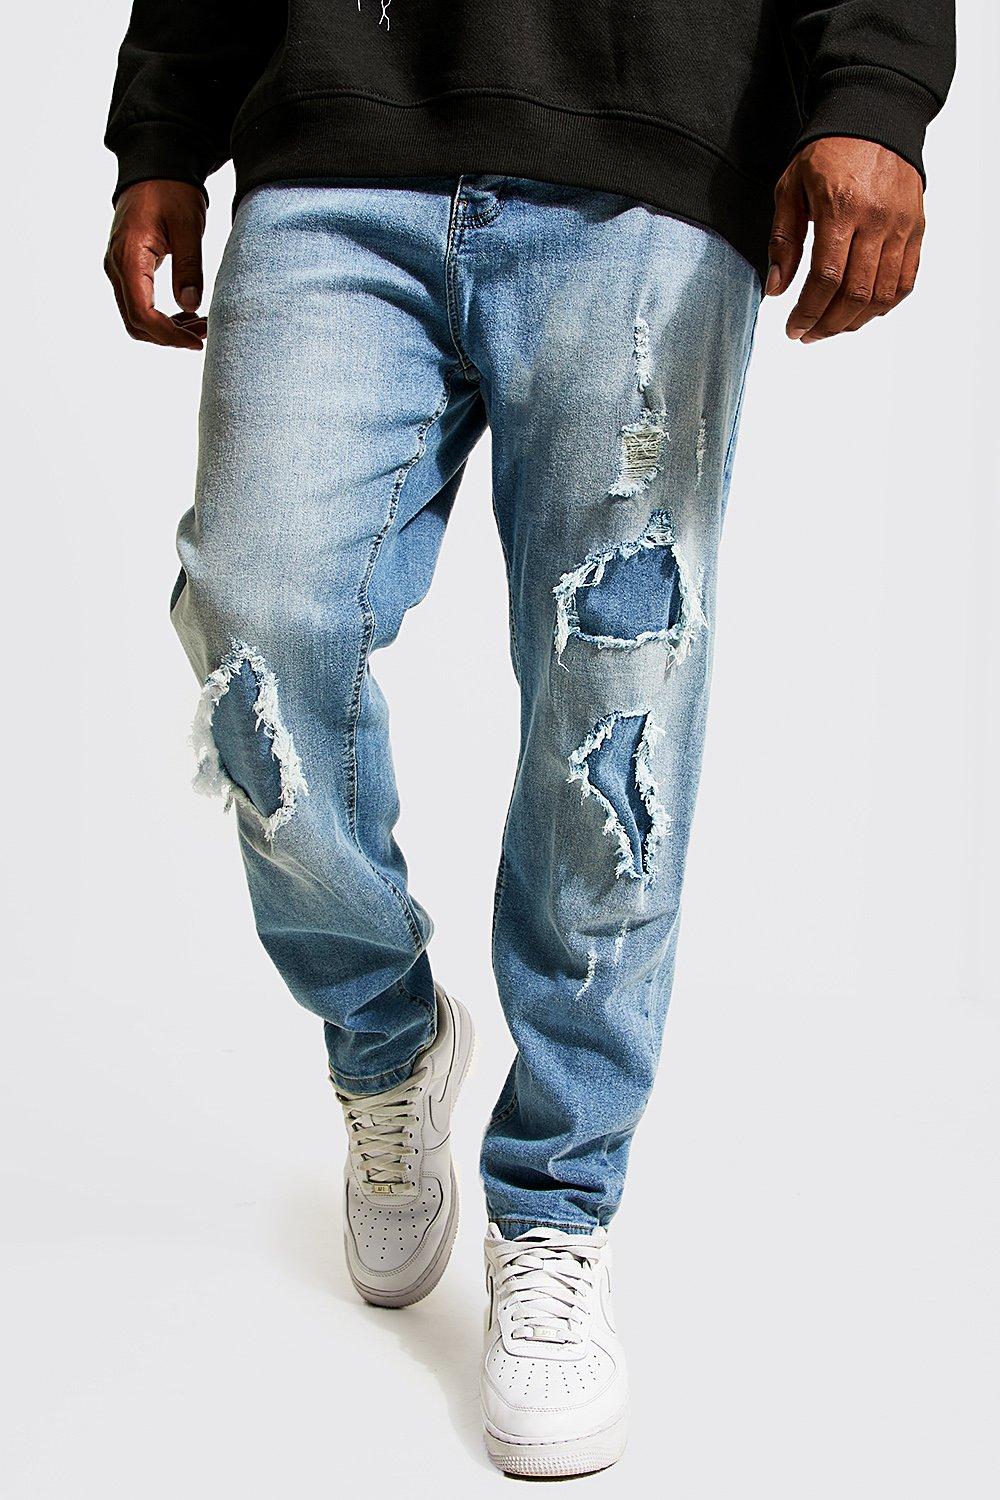 BoohooMAN Denim Skinny Stretch Busted Knee Distressed Jeans in Light Blue Mens Jeans BoohooMAN Jeans for Men Blue 